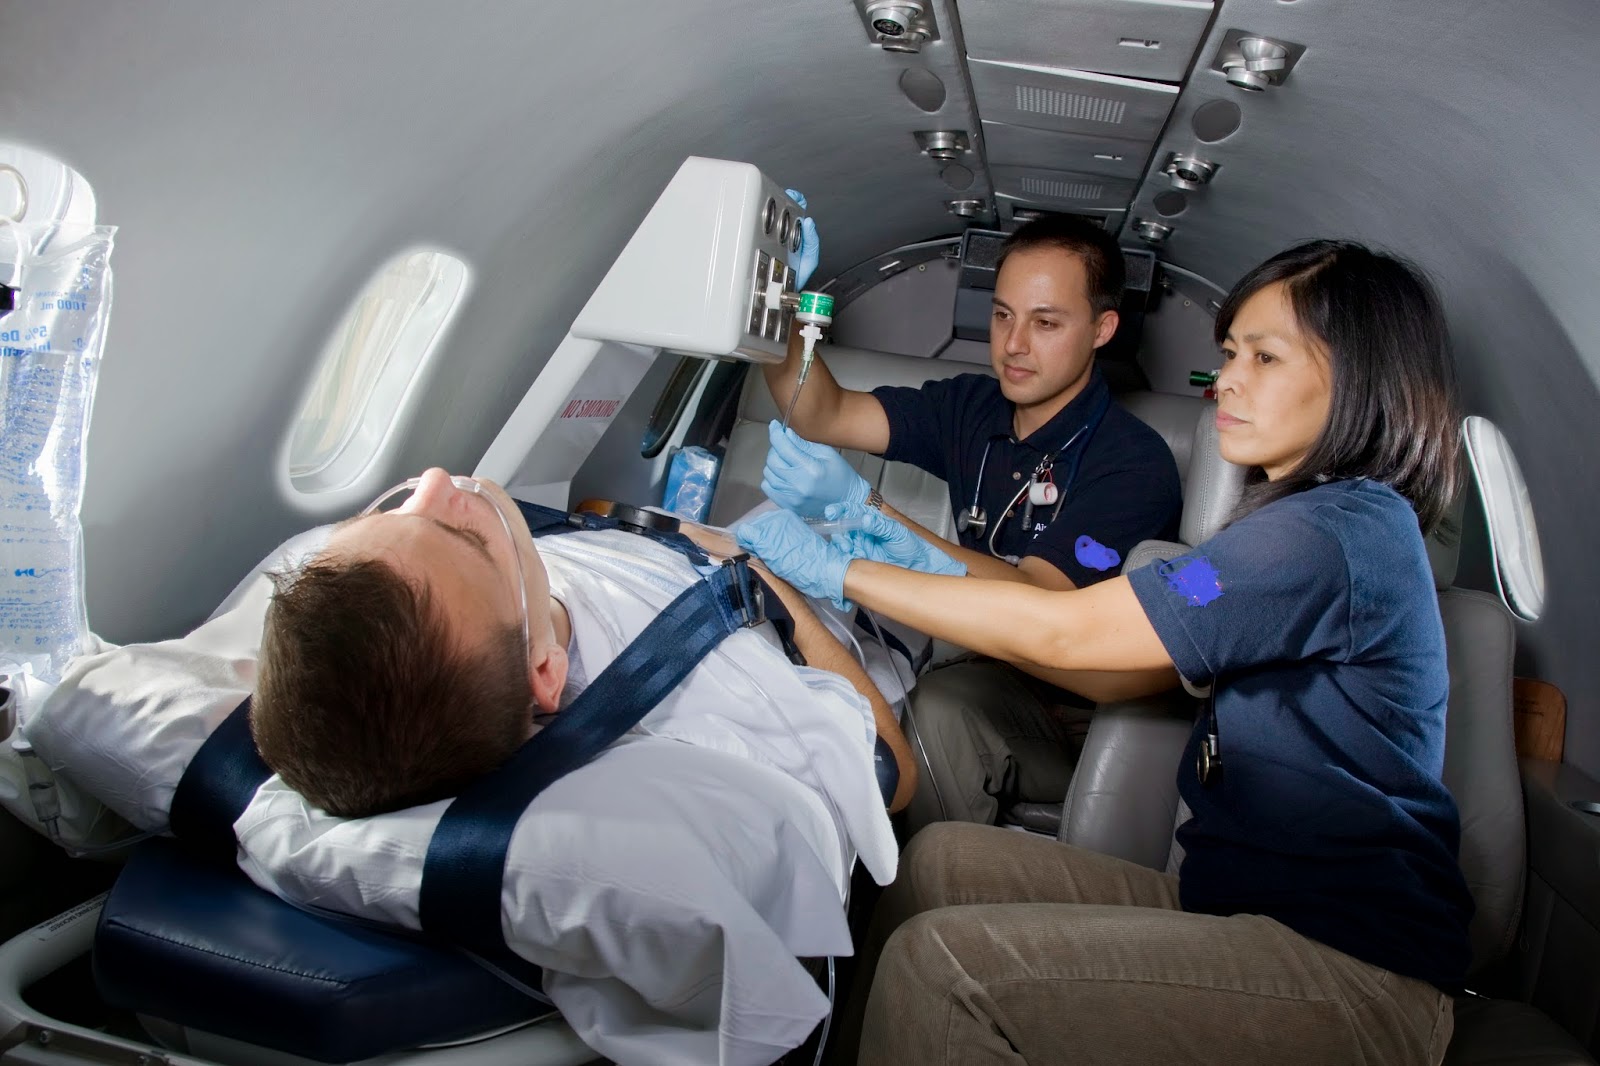 Air Ambulance Traveler Information: What To Know Before You Go